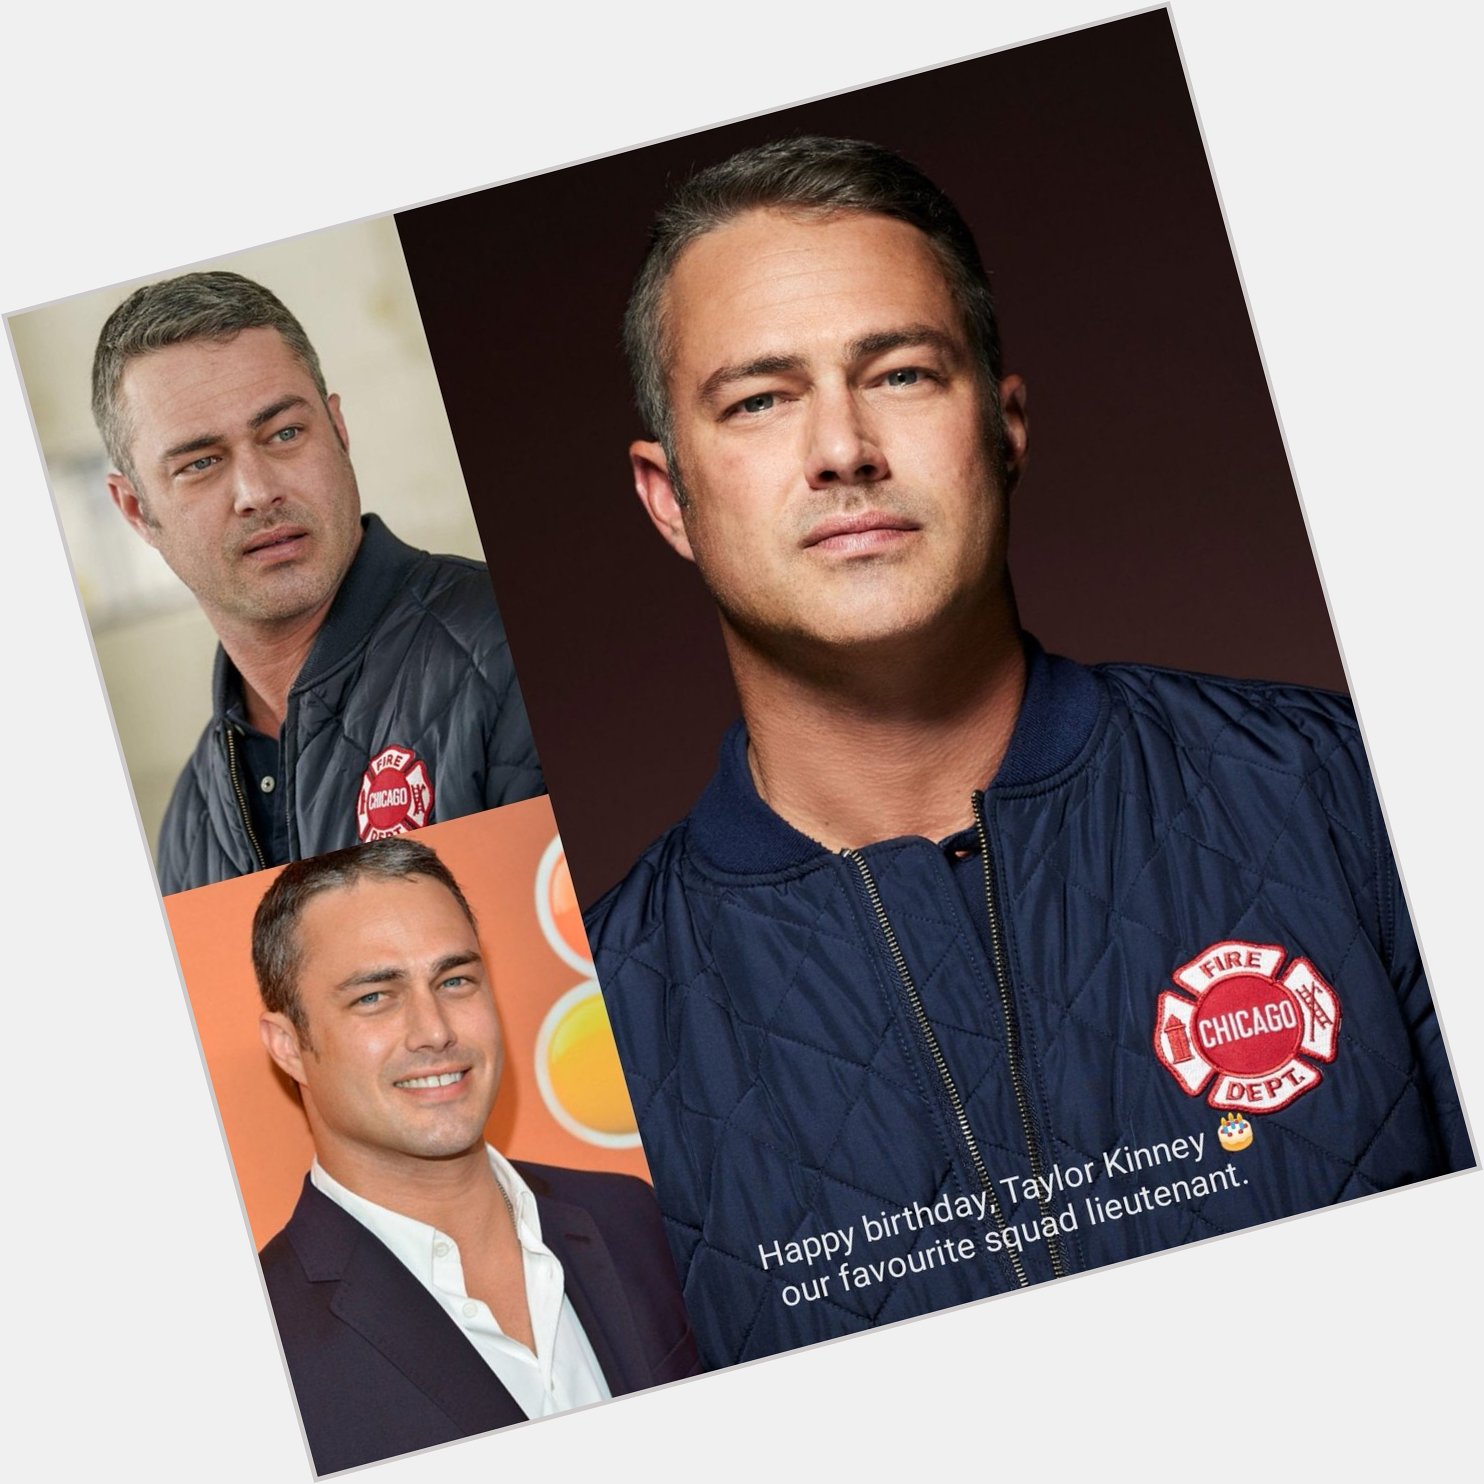 Happy birthday, Taylor Kinney our favourite squad lieutenant. 